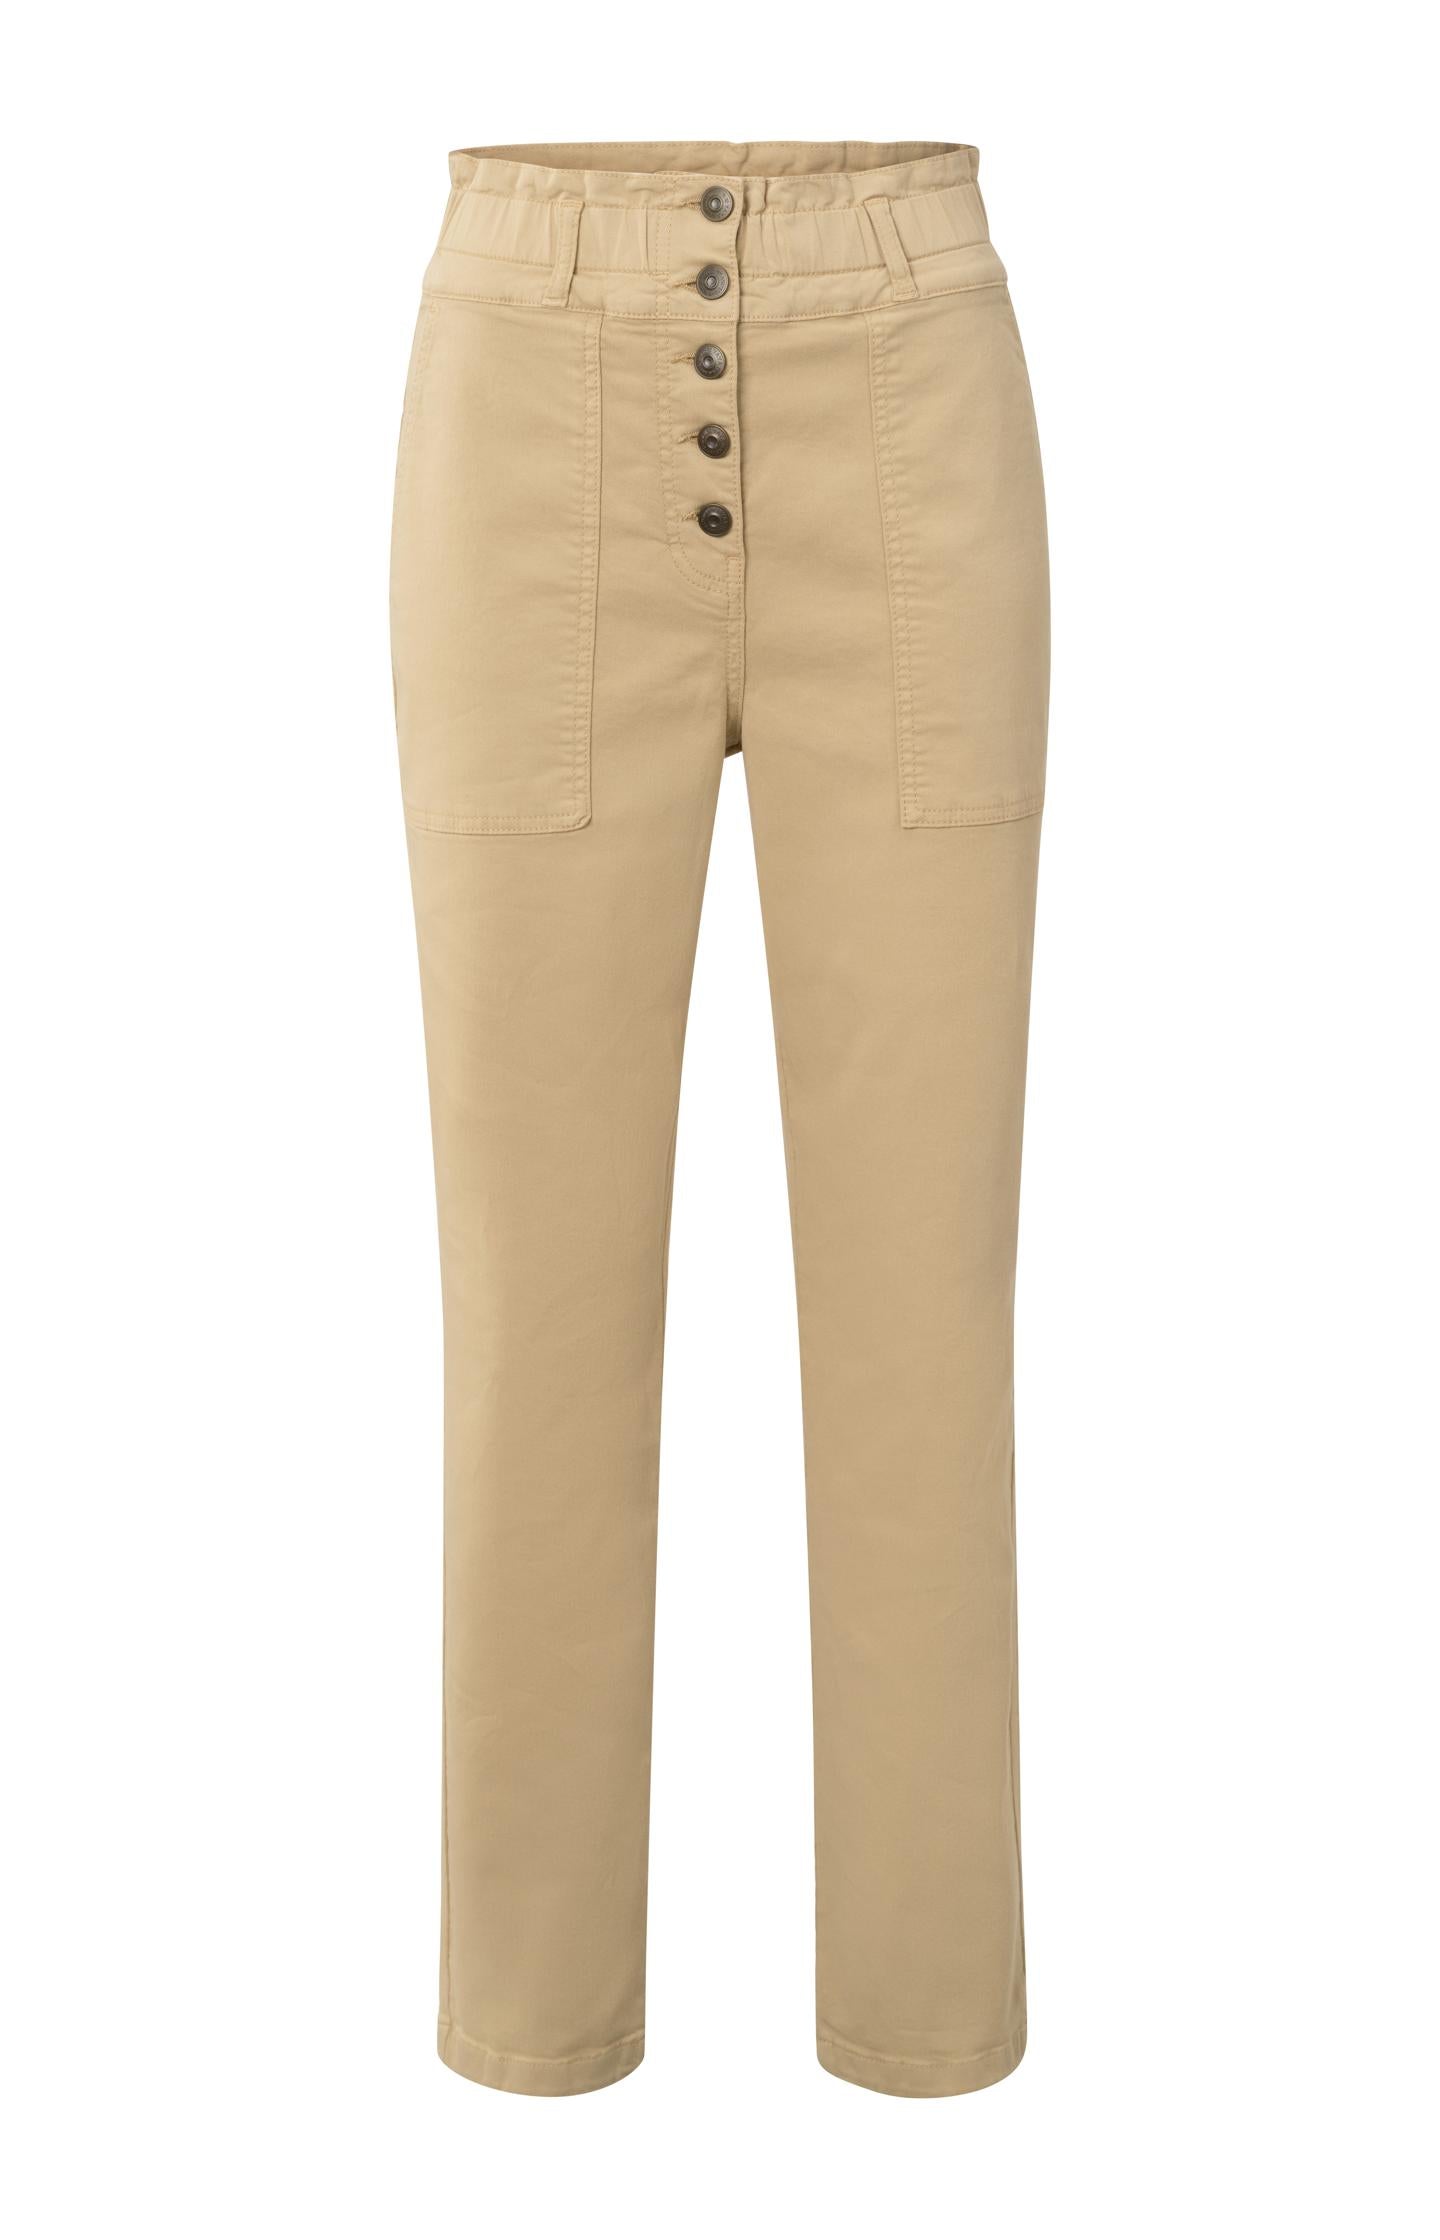 Cargo trousers with paperbag waist, pockets and buttons - Type: product